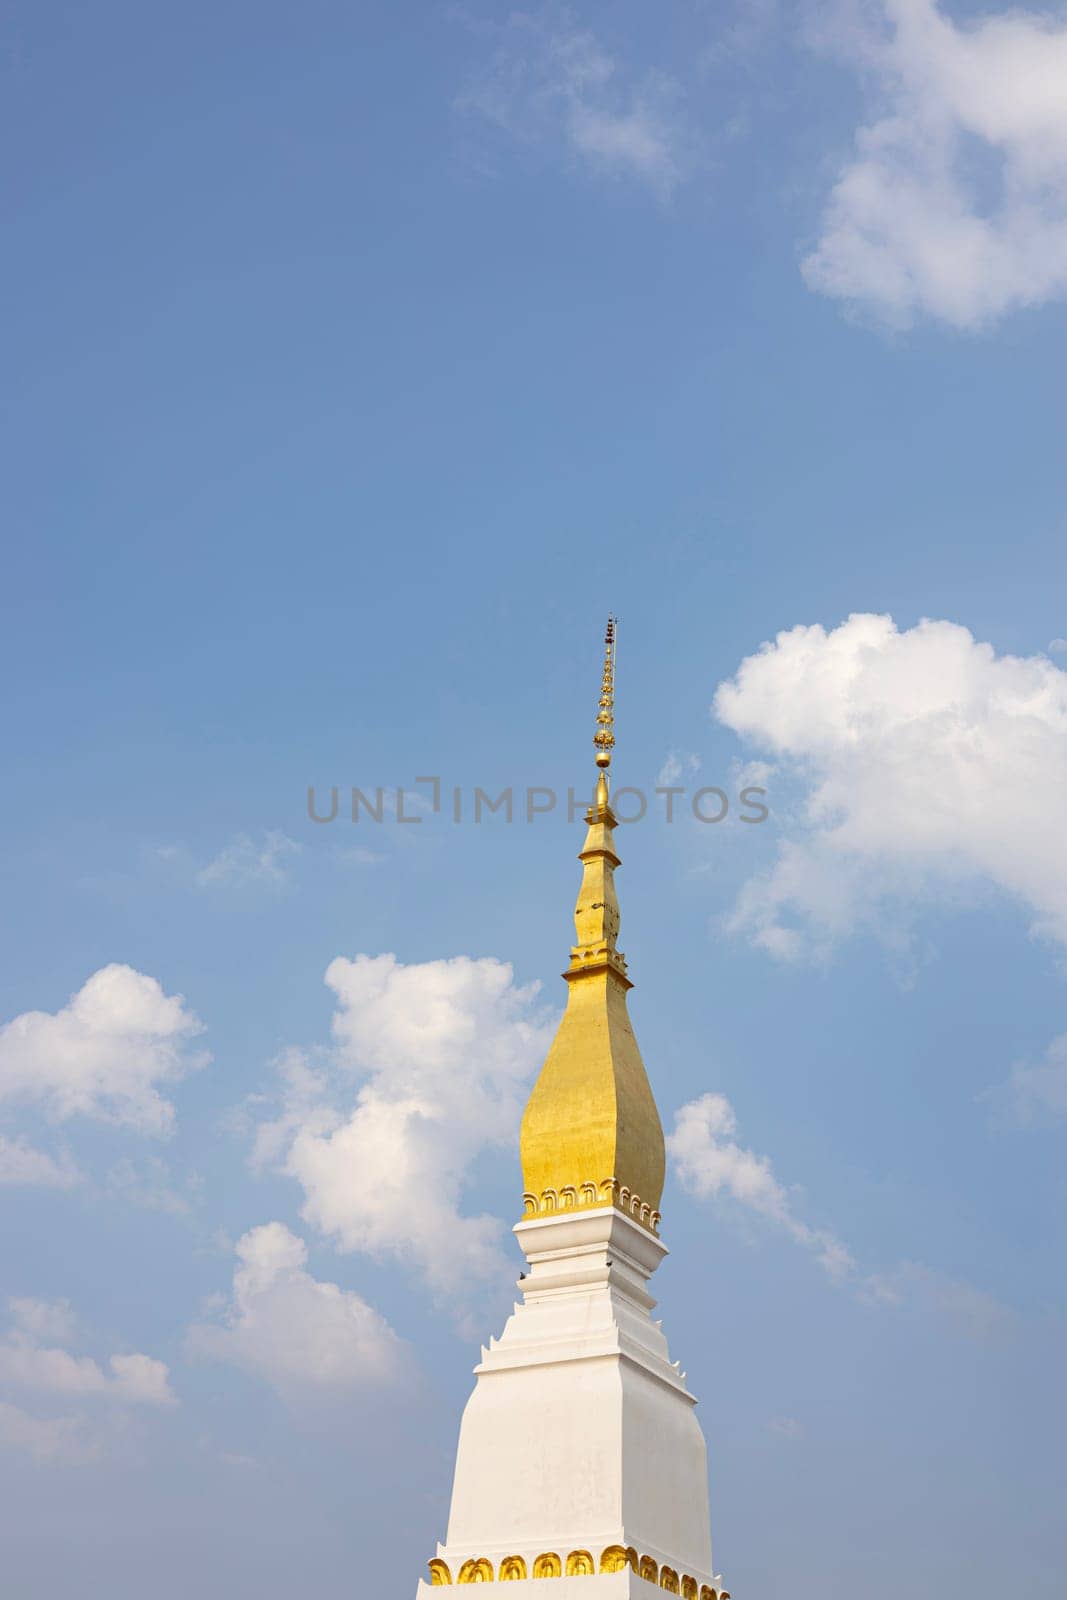 The Top Of The Pagoda Of Temple by urzine